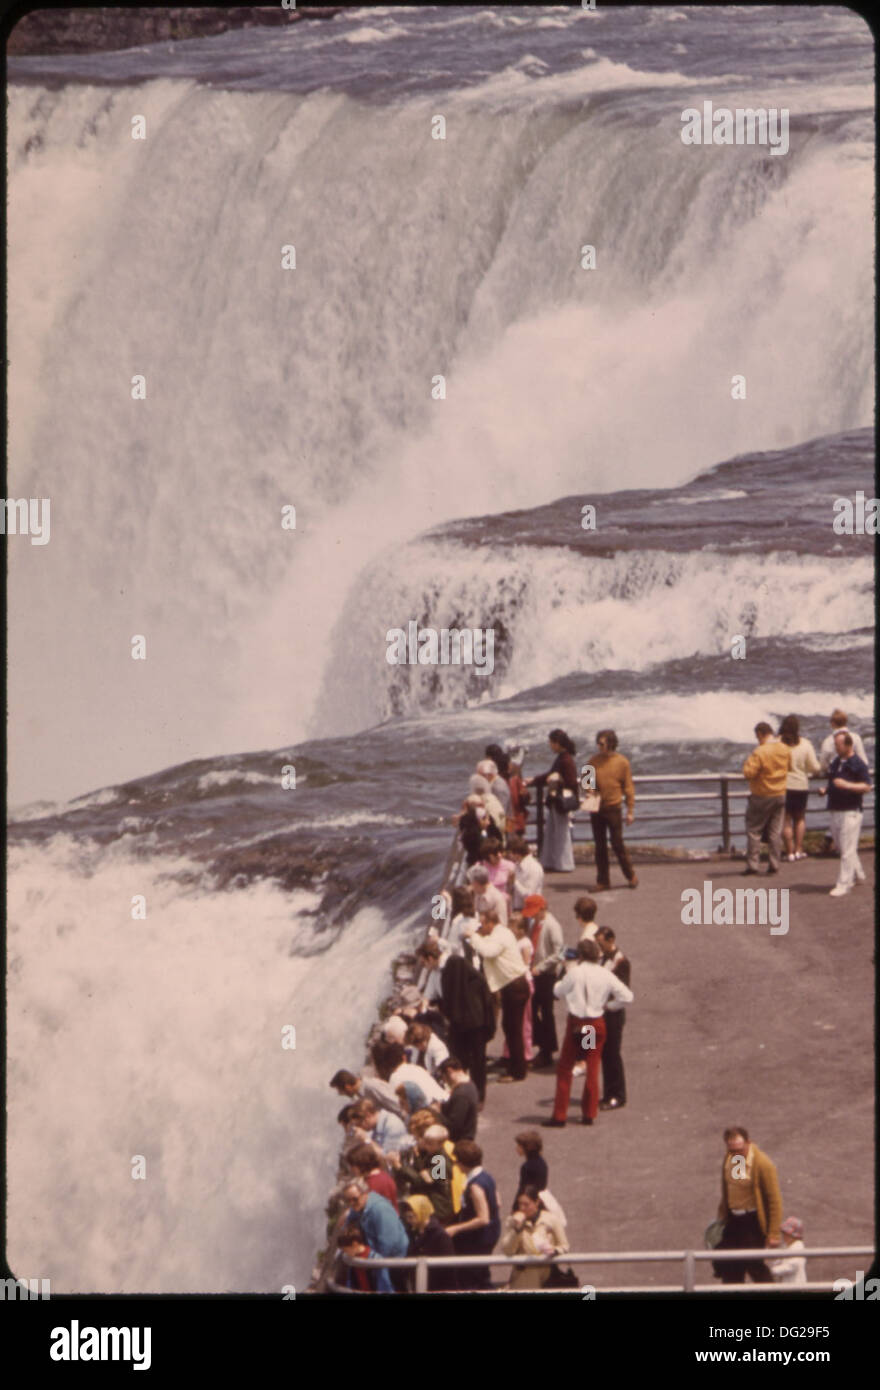 TOURISTS ON GOAT ISLAND AT THE BRINK OF THE CATARACT ENJOY A SPECTACULAR VIEW OF THE AMERICAN FALLS. THE NIAGARA... 549560 Stock Photo